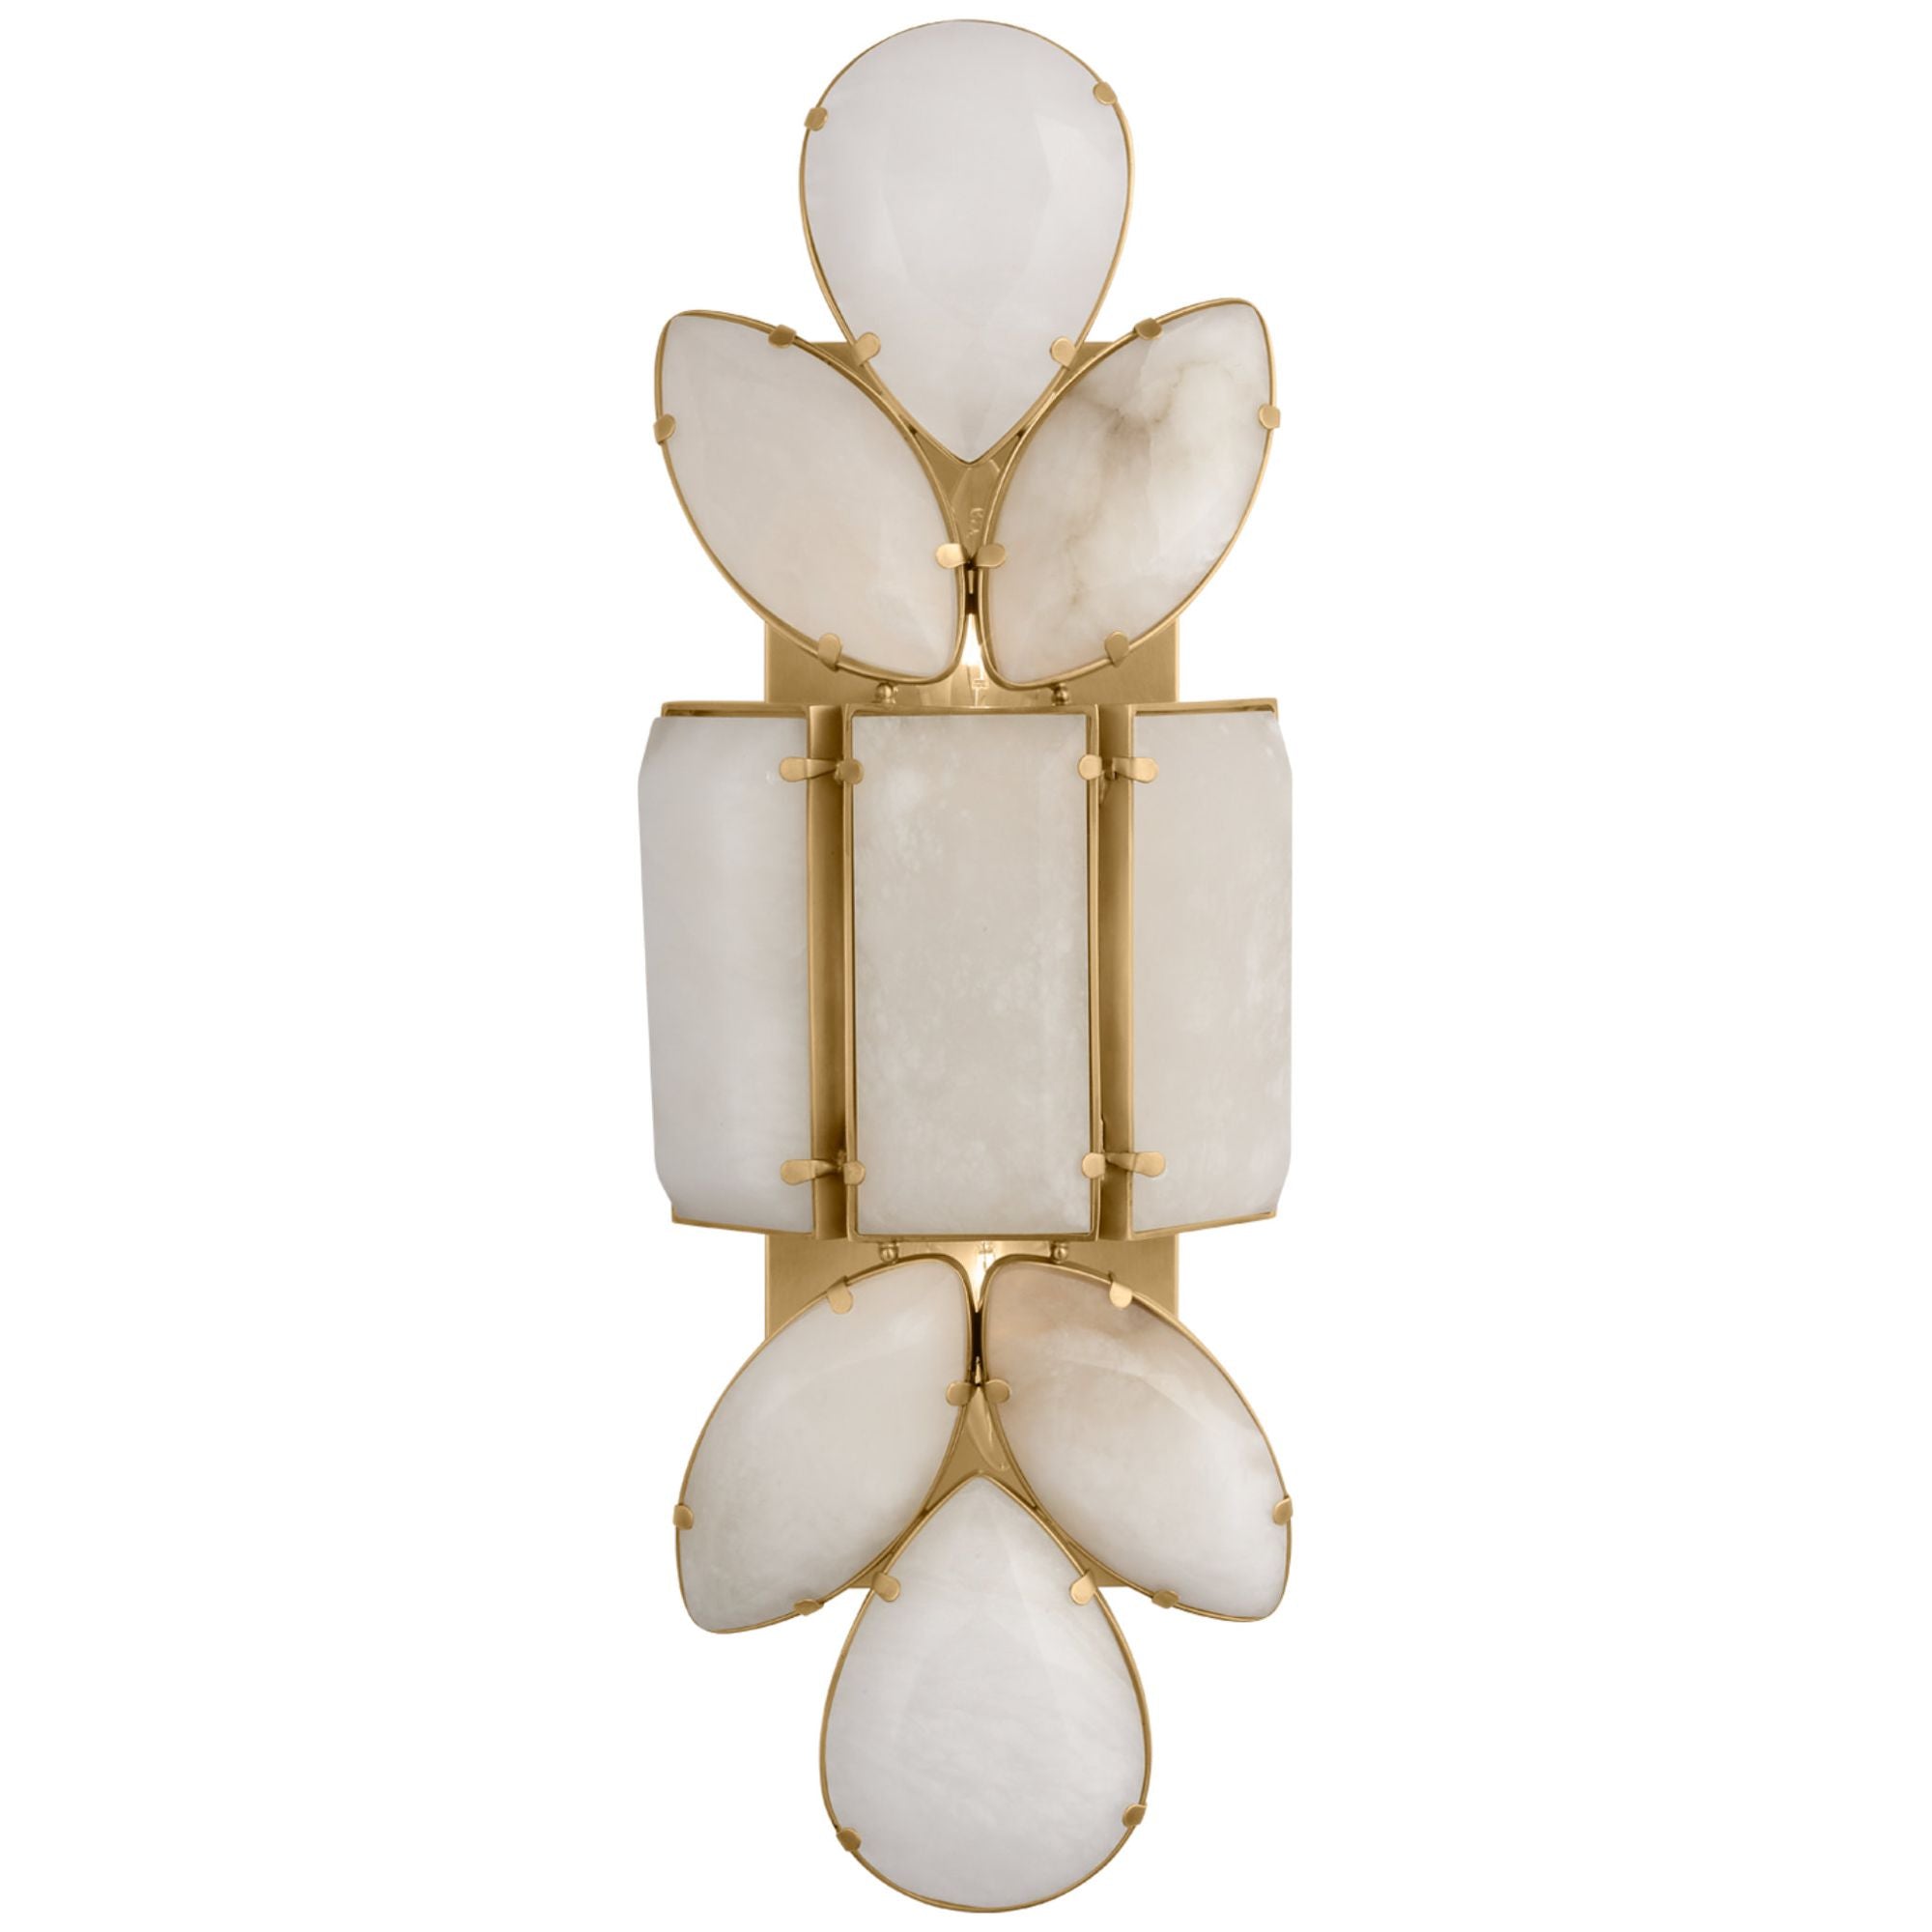 kate spade new york Lloyd Large Jeweled Sconce in Soft Brass with Alabaster